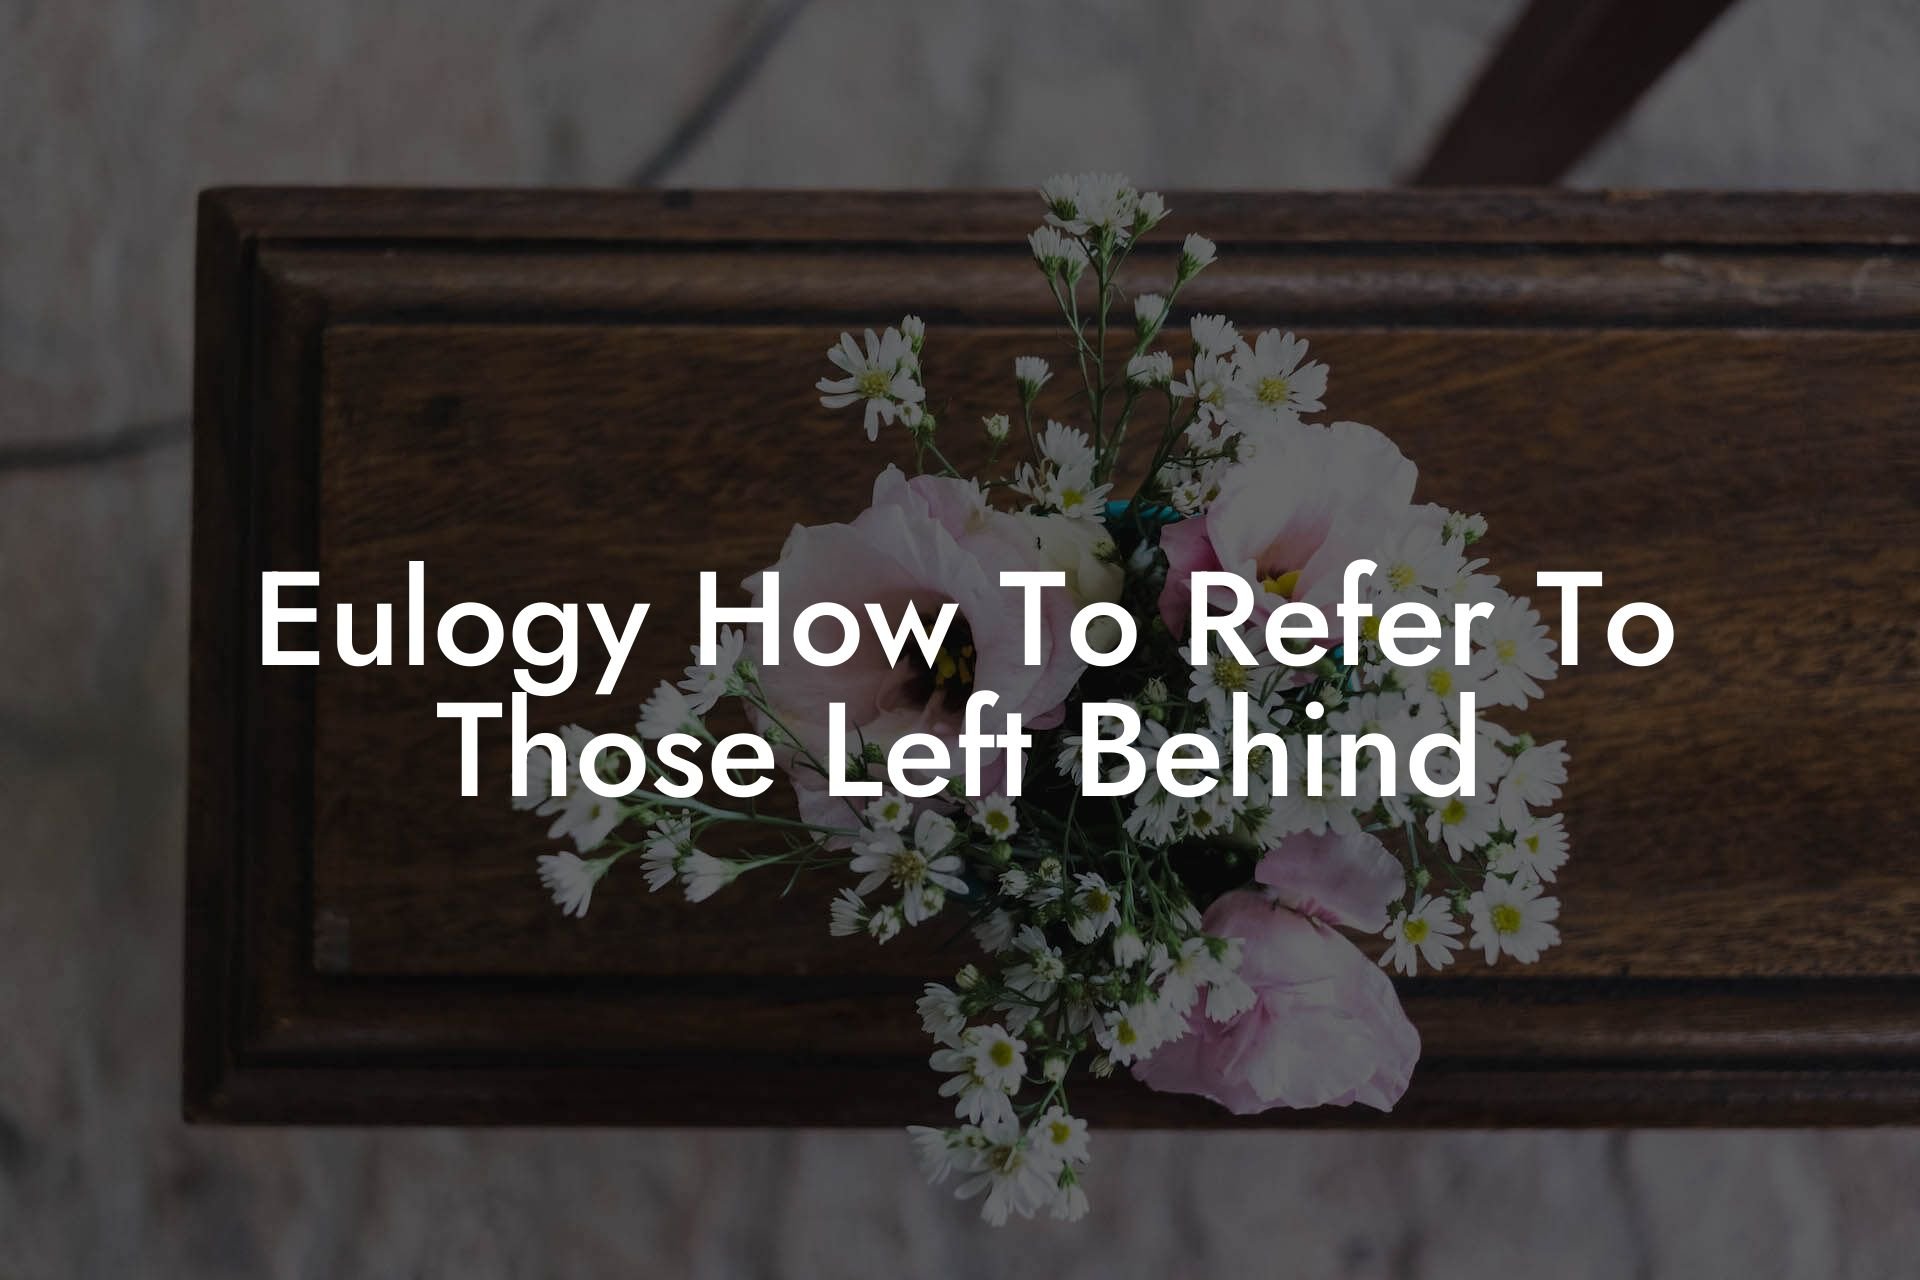 Eulogy How To Refer To Those Left Behind